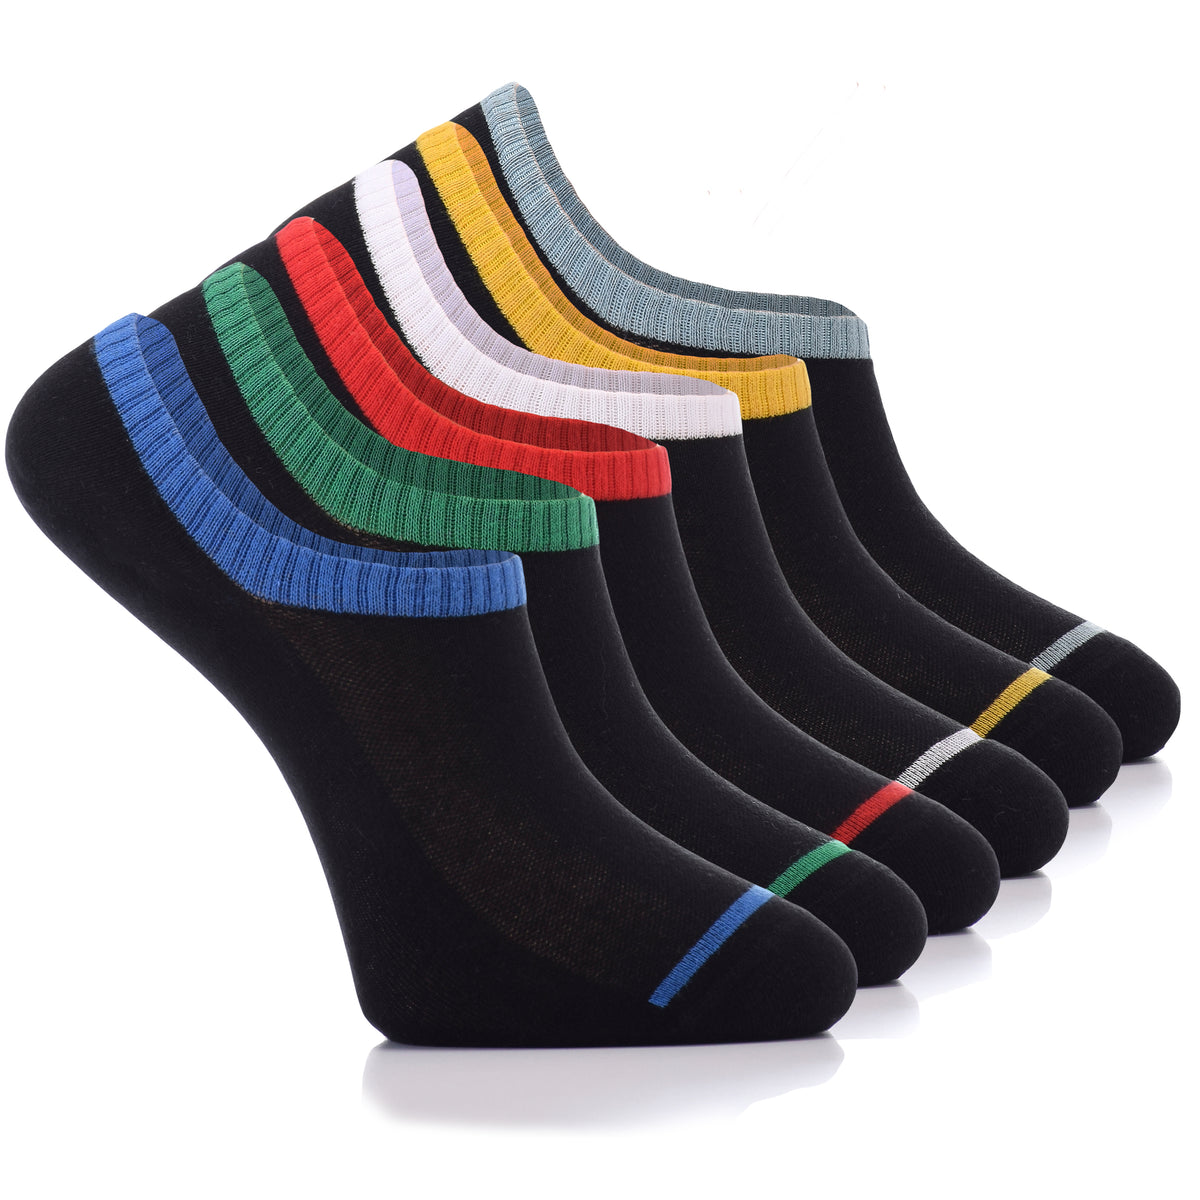 Elevate your sock game with these Patterned Cotton No-Show Socks for Men, boasting six black socks adorned with vibrant stripes.